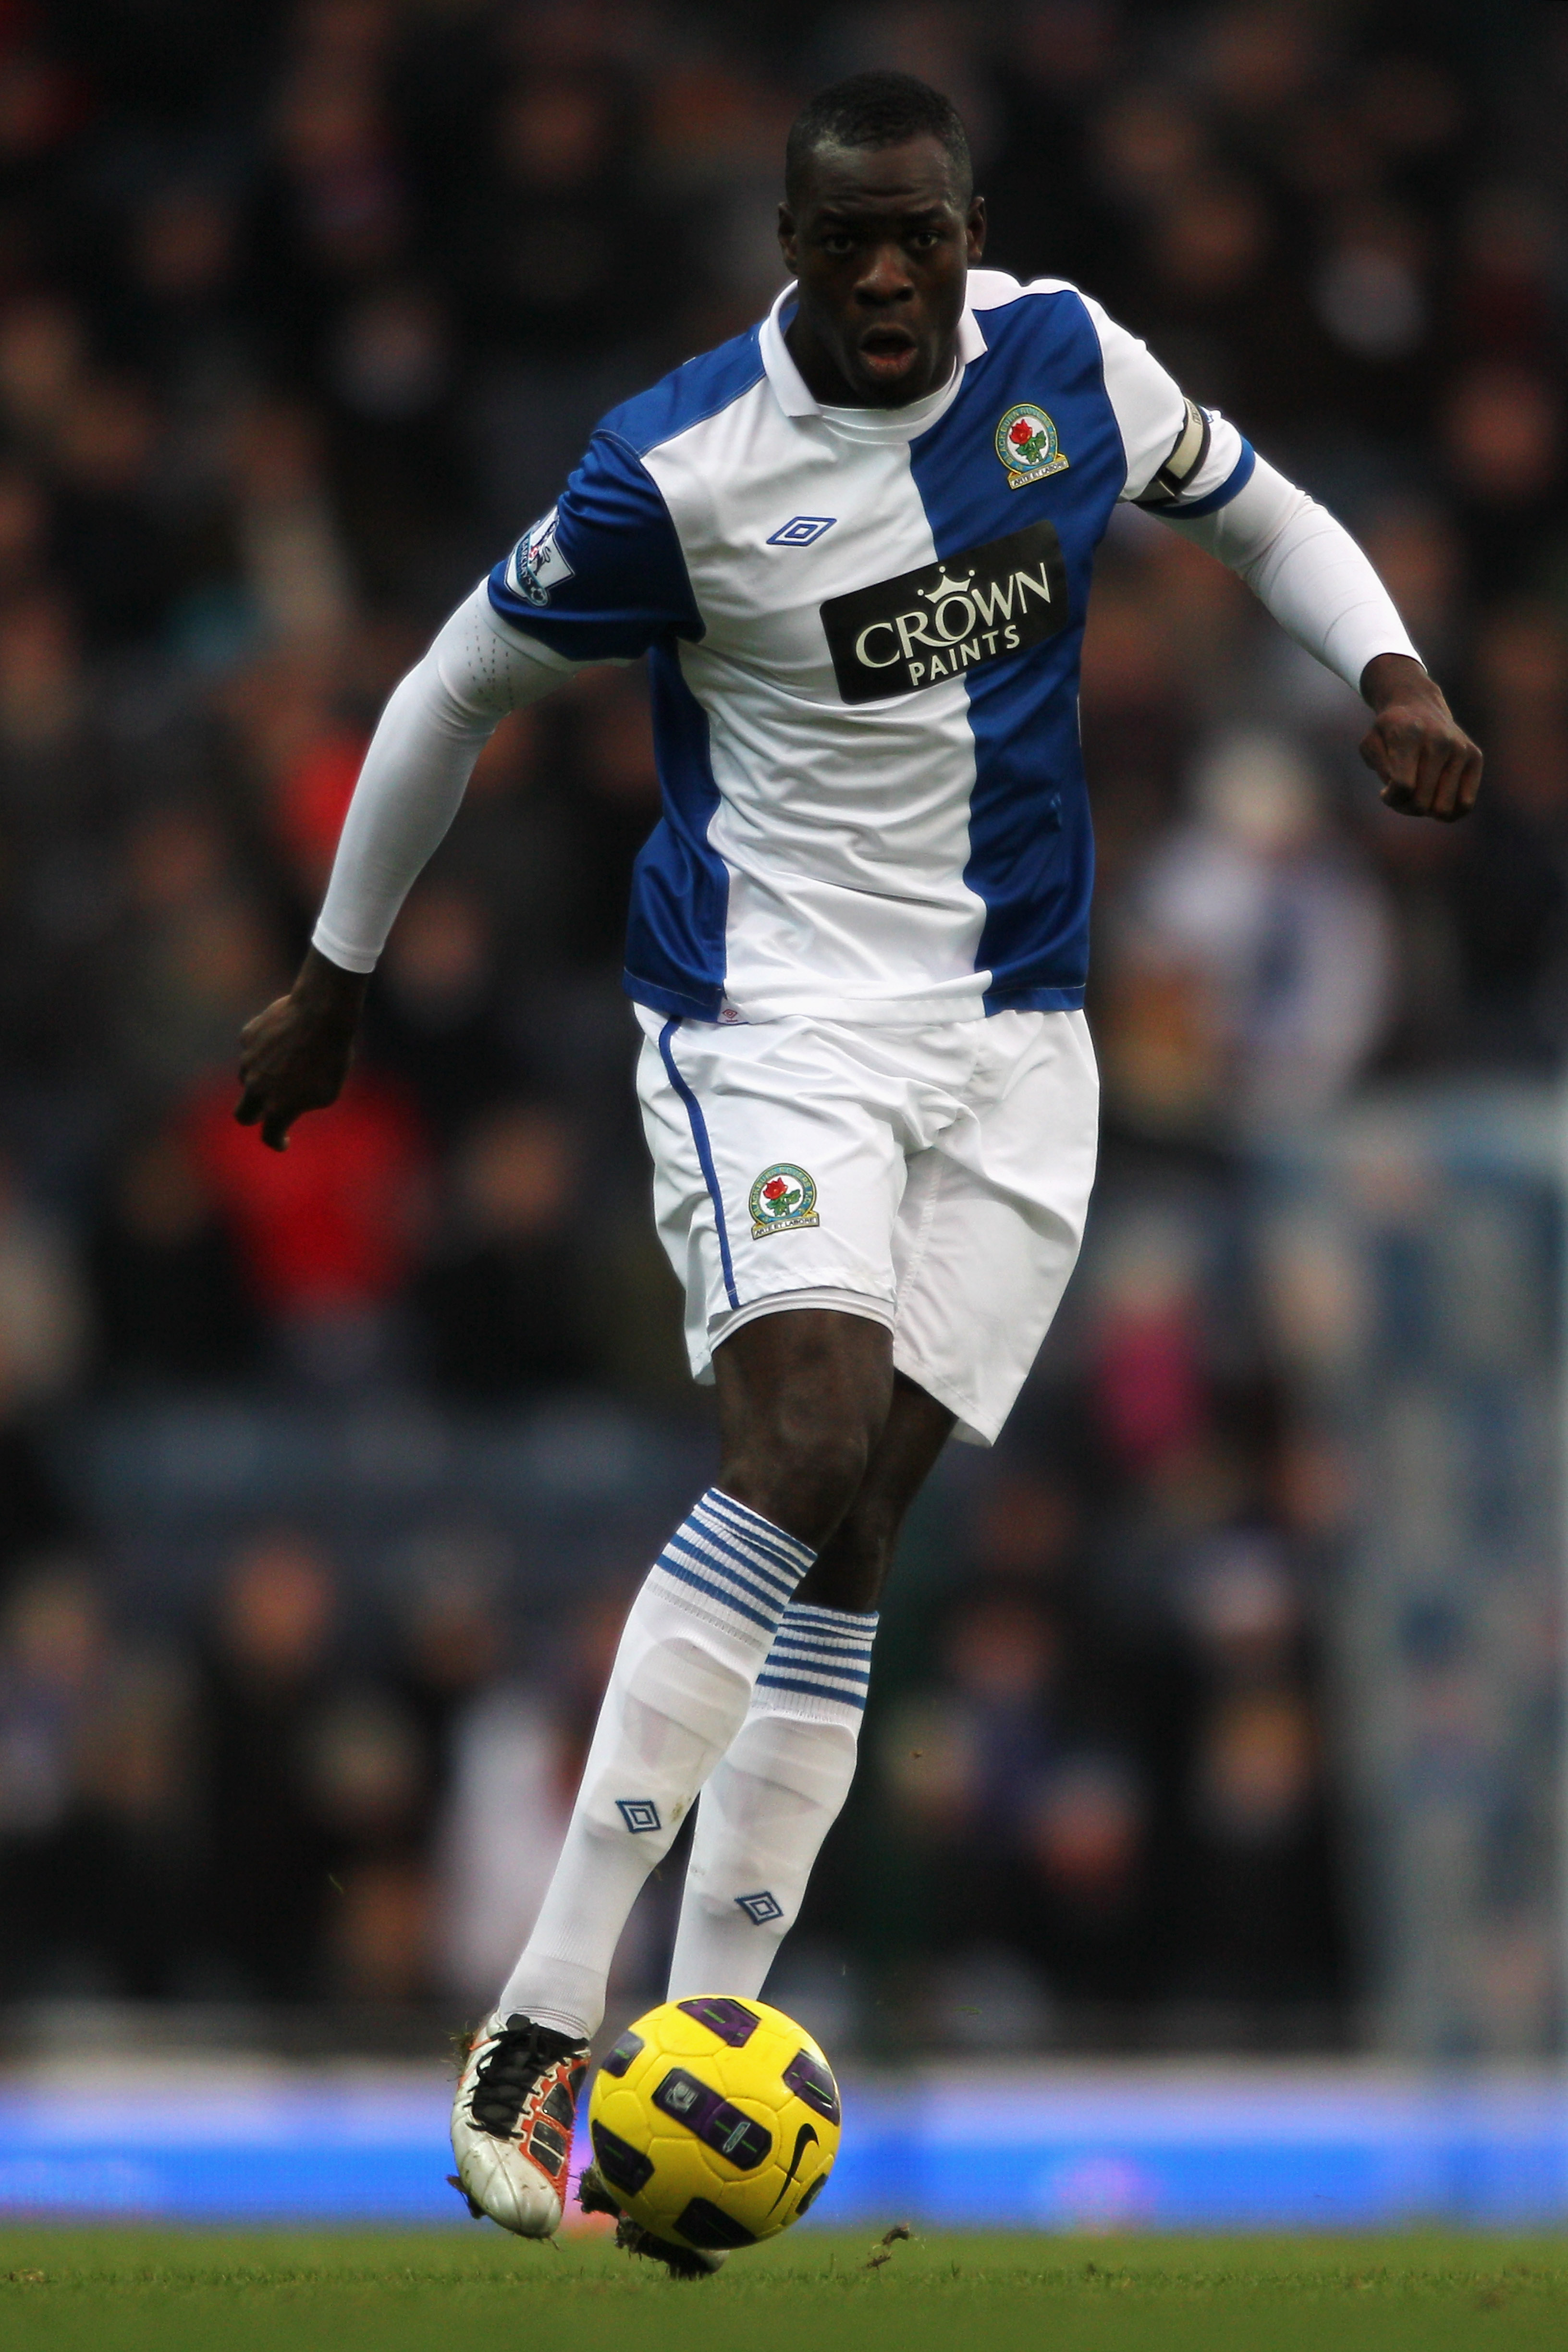 BLACKBURN, ENGLAND - DECEMBER 18:  Christopher Samba of Blackburn in action during the Barclays Premier League match between Blackburn Rovers and West Ham United at Ewood park on December 18, 2010 in Blackburn, England.  (Photo by Dean Mouhtaropoulos/Gett